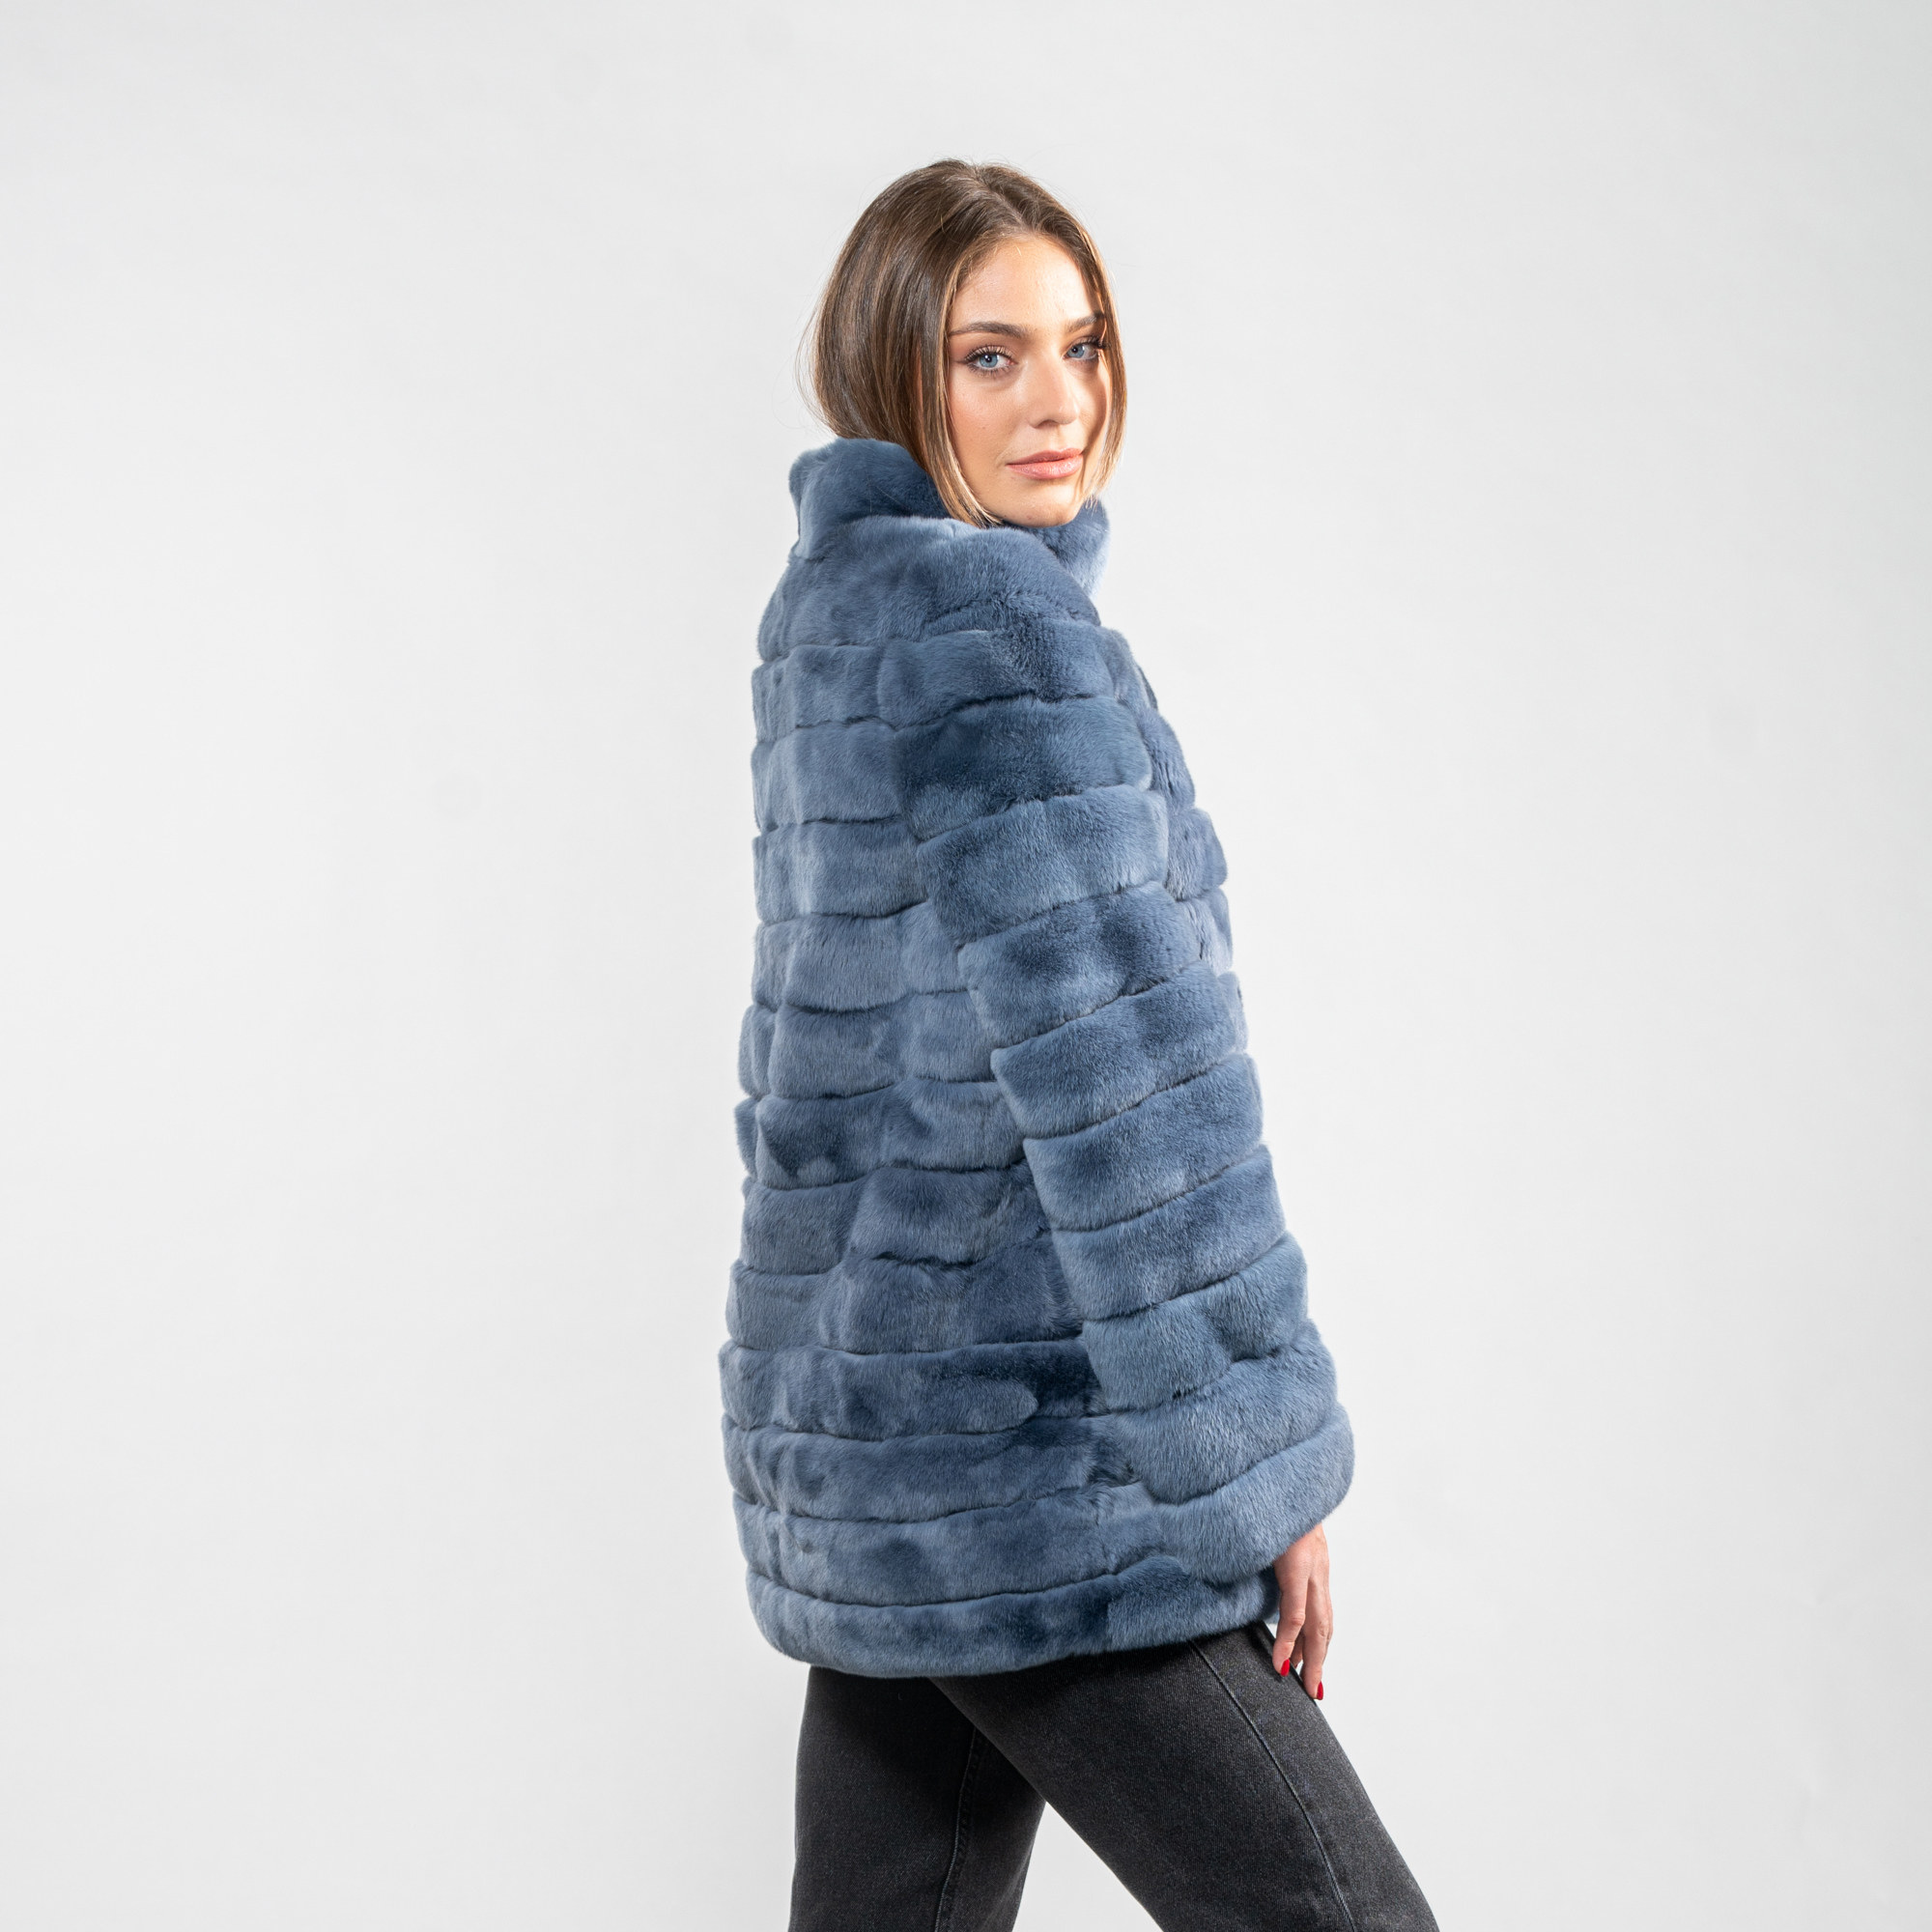 Rabbit fur jacket with a collar in blue color